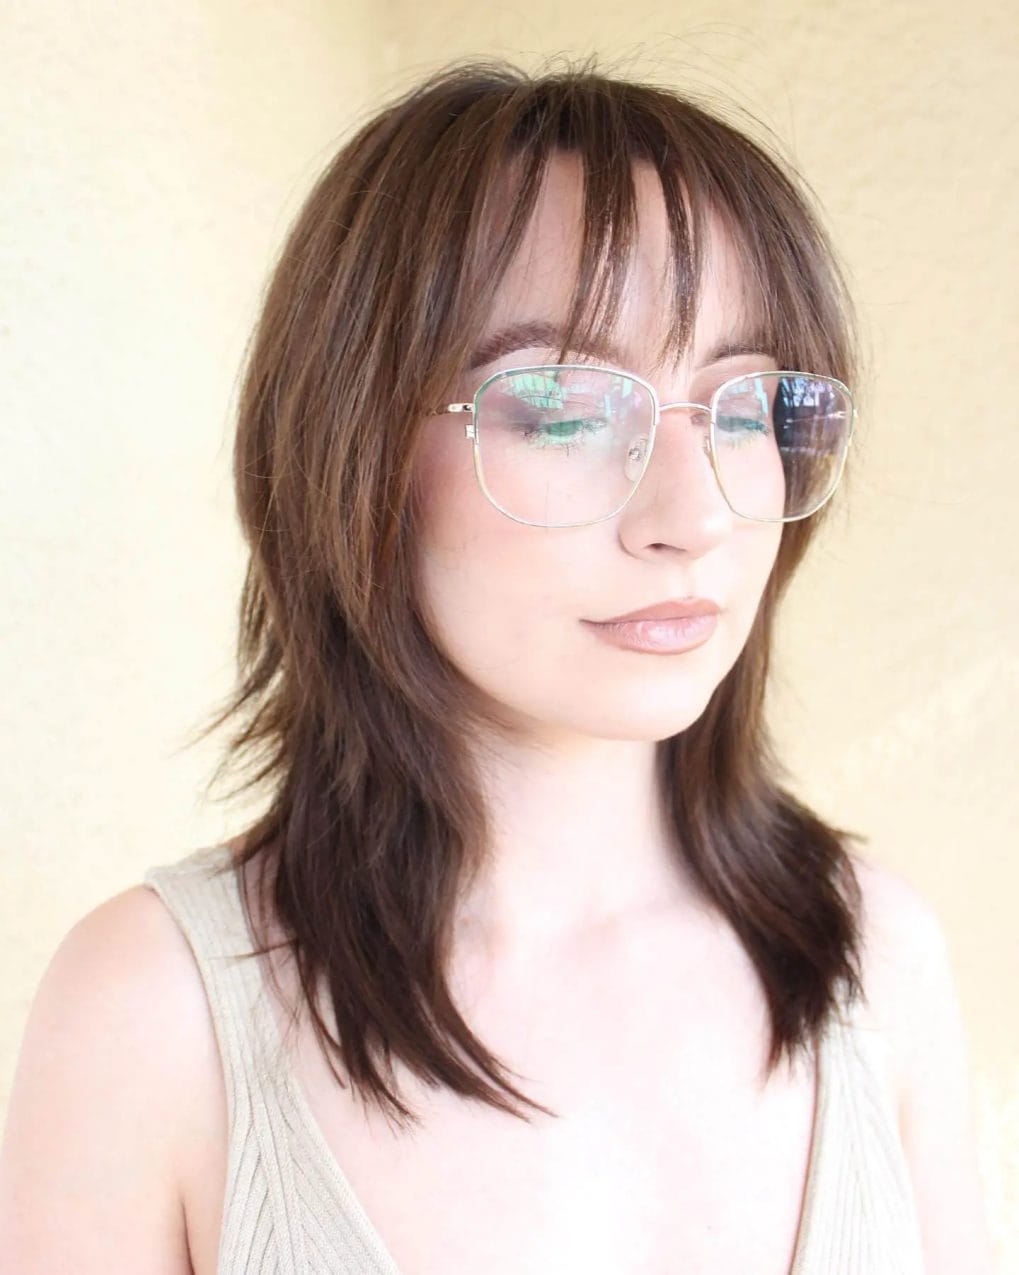 Shoulder-length brunette with see-through bangs and oversized glasses.